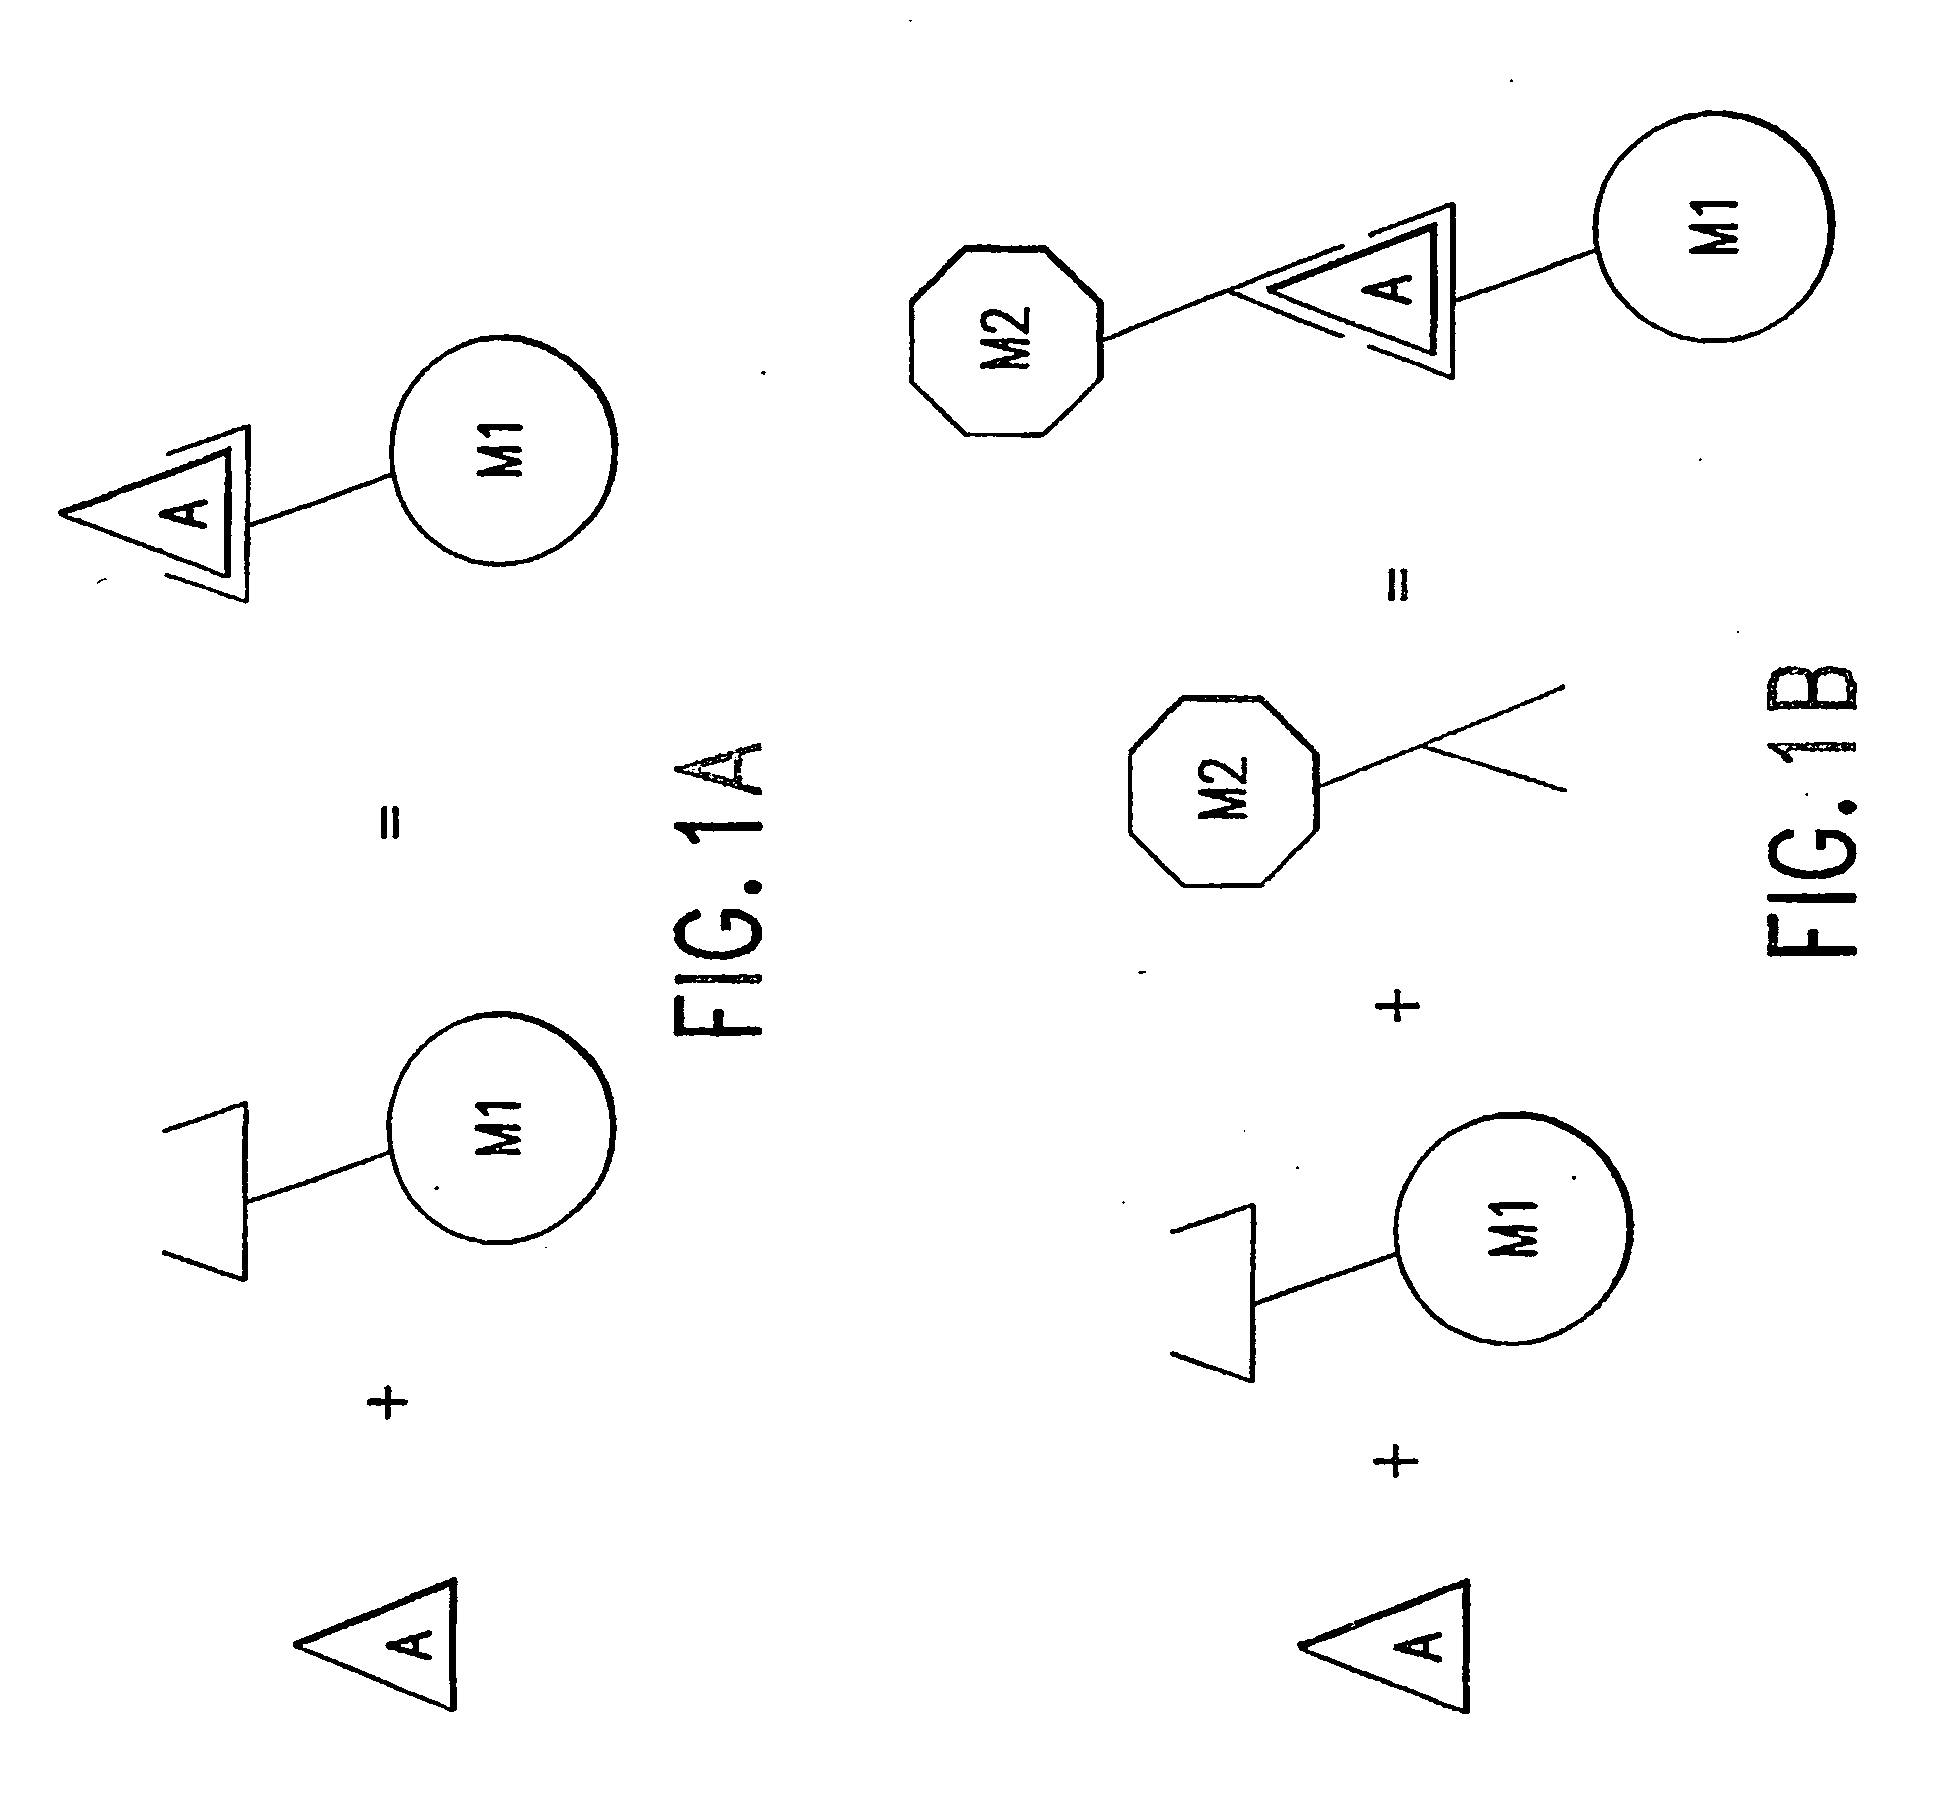 Method of using a non-antibody protein to detect and measure an analyte